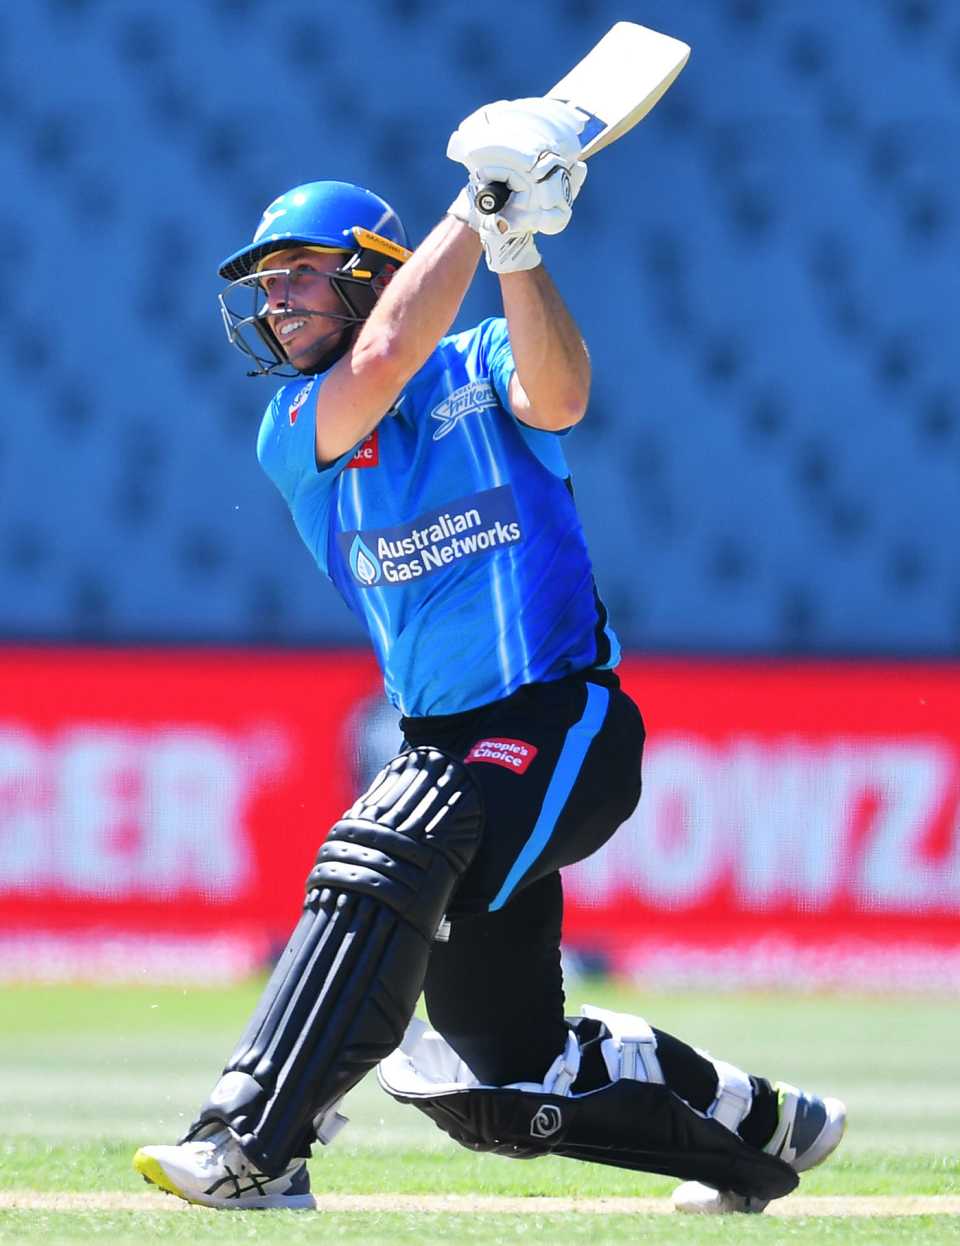 Jono Wells was the key to Adelaide Strikers' innings, Adelaide Strikers vs Melbourne Stars, BBL, Adelaide, January 15, 2021